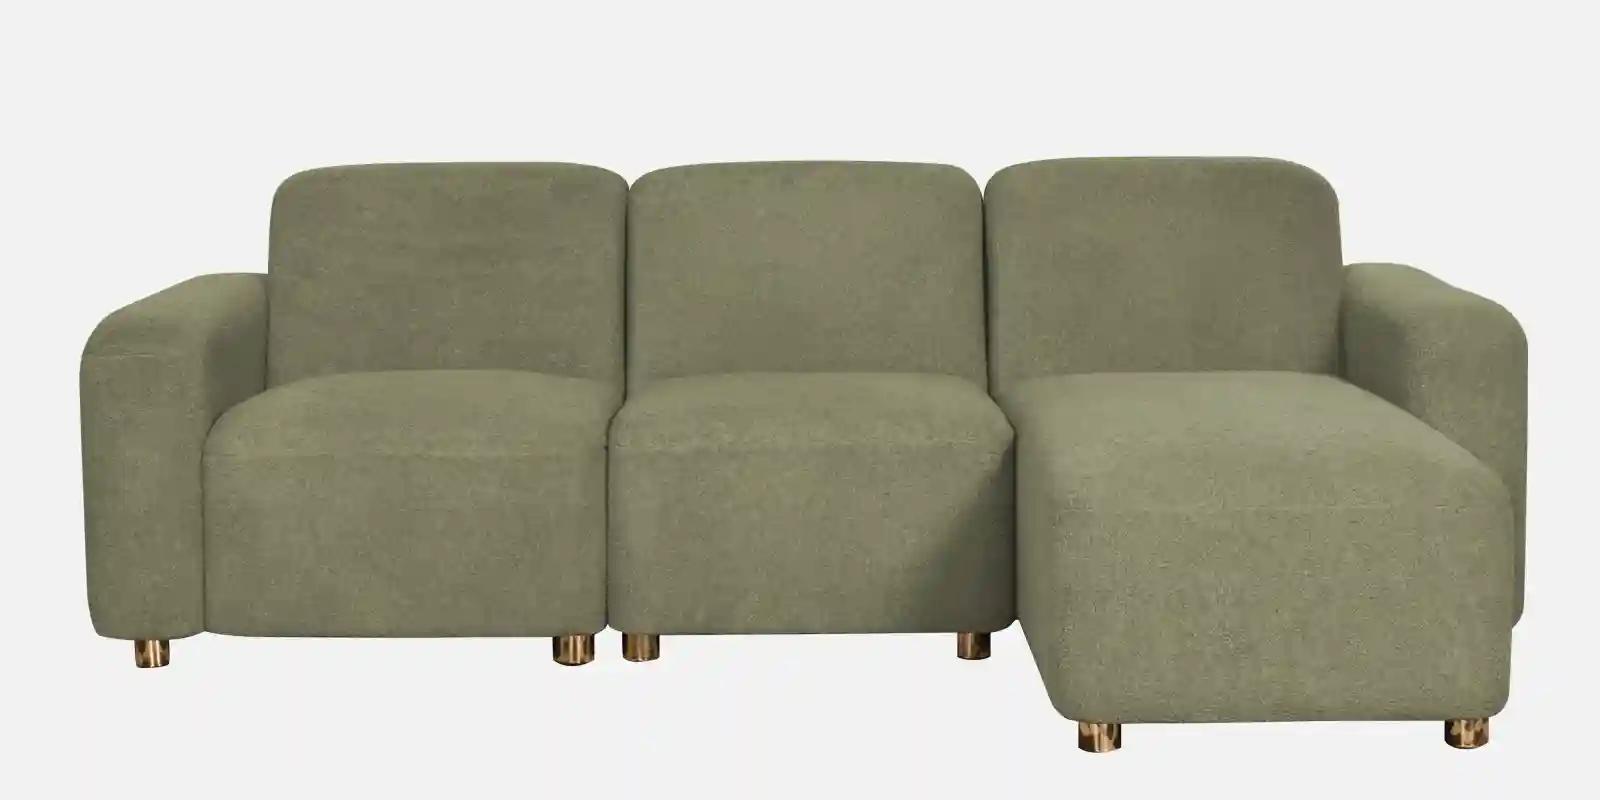 Pine Wood Polyester Fabric Sofa Grey -2 Seater LHS